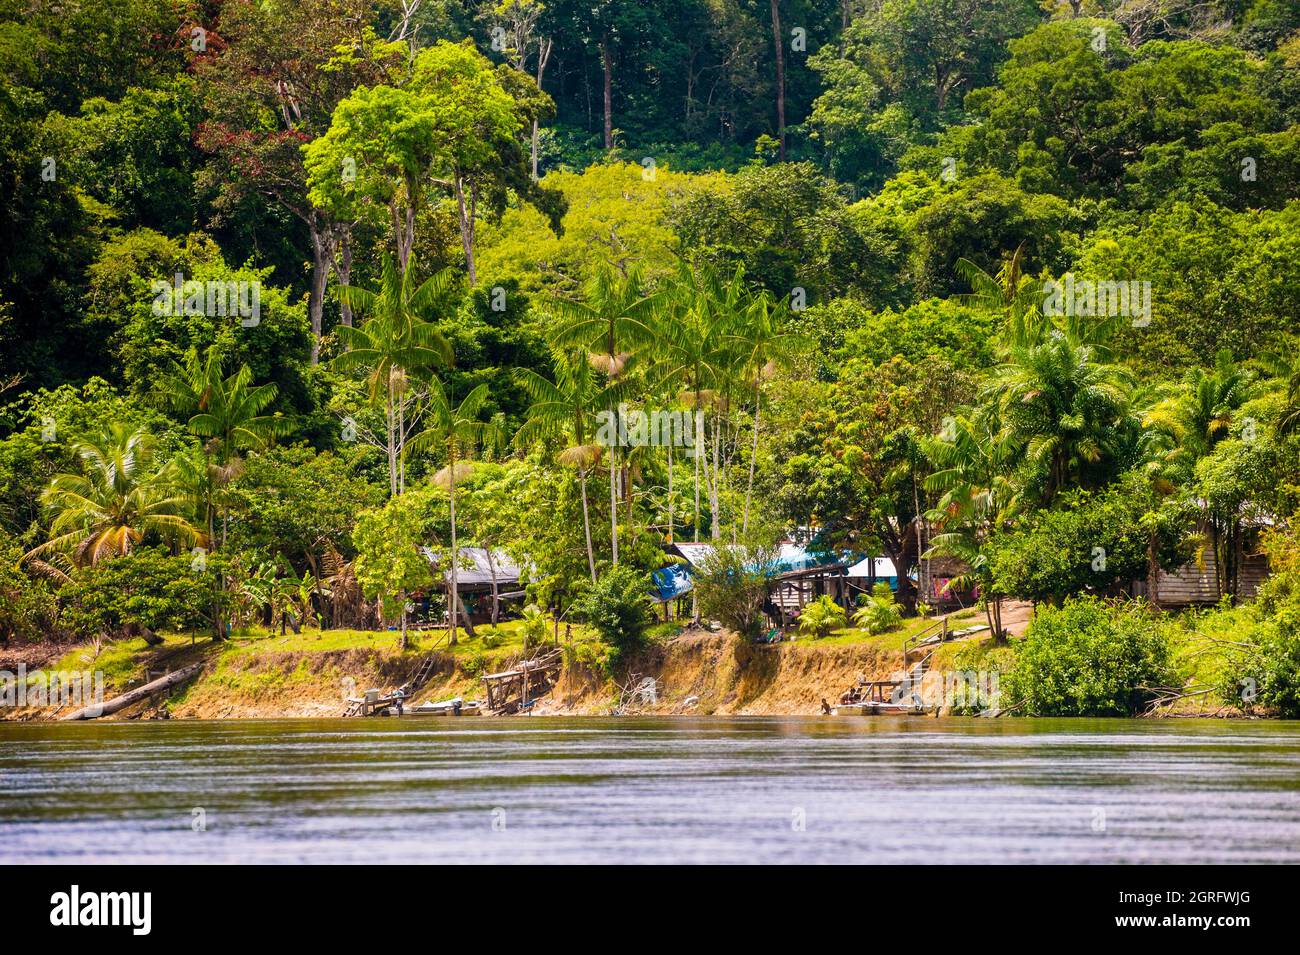 France, French Guiana, Parc Amazonien de Guyane, Camopi, part of the Amerindian village of Wayãpi, on the banks of the Camopi river Stock Photo